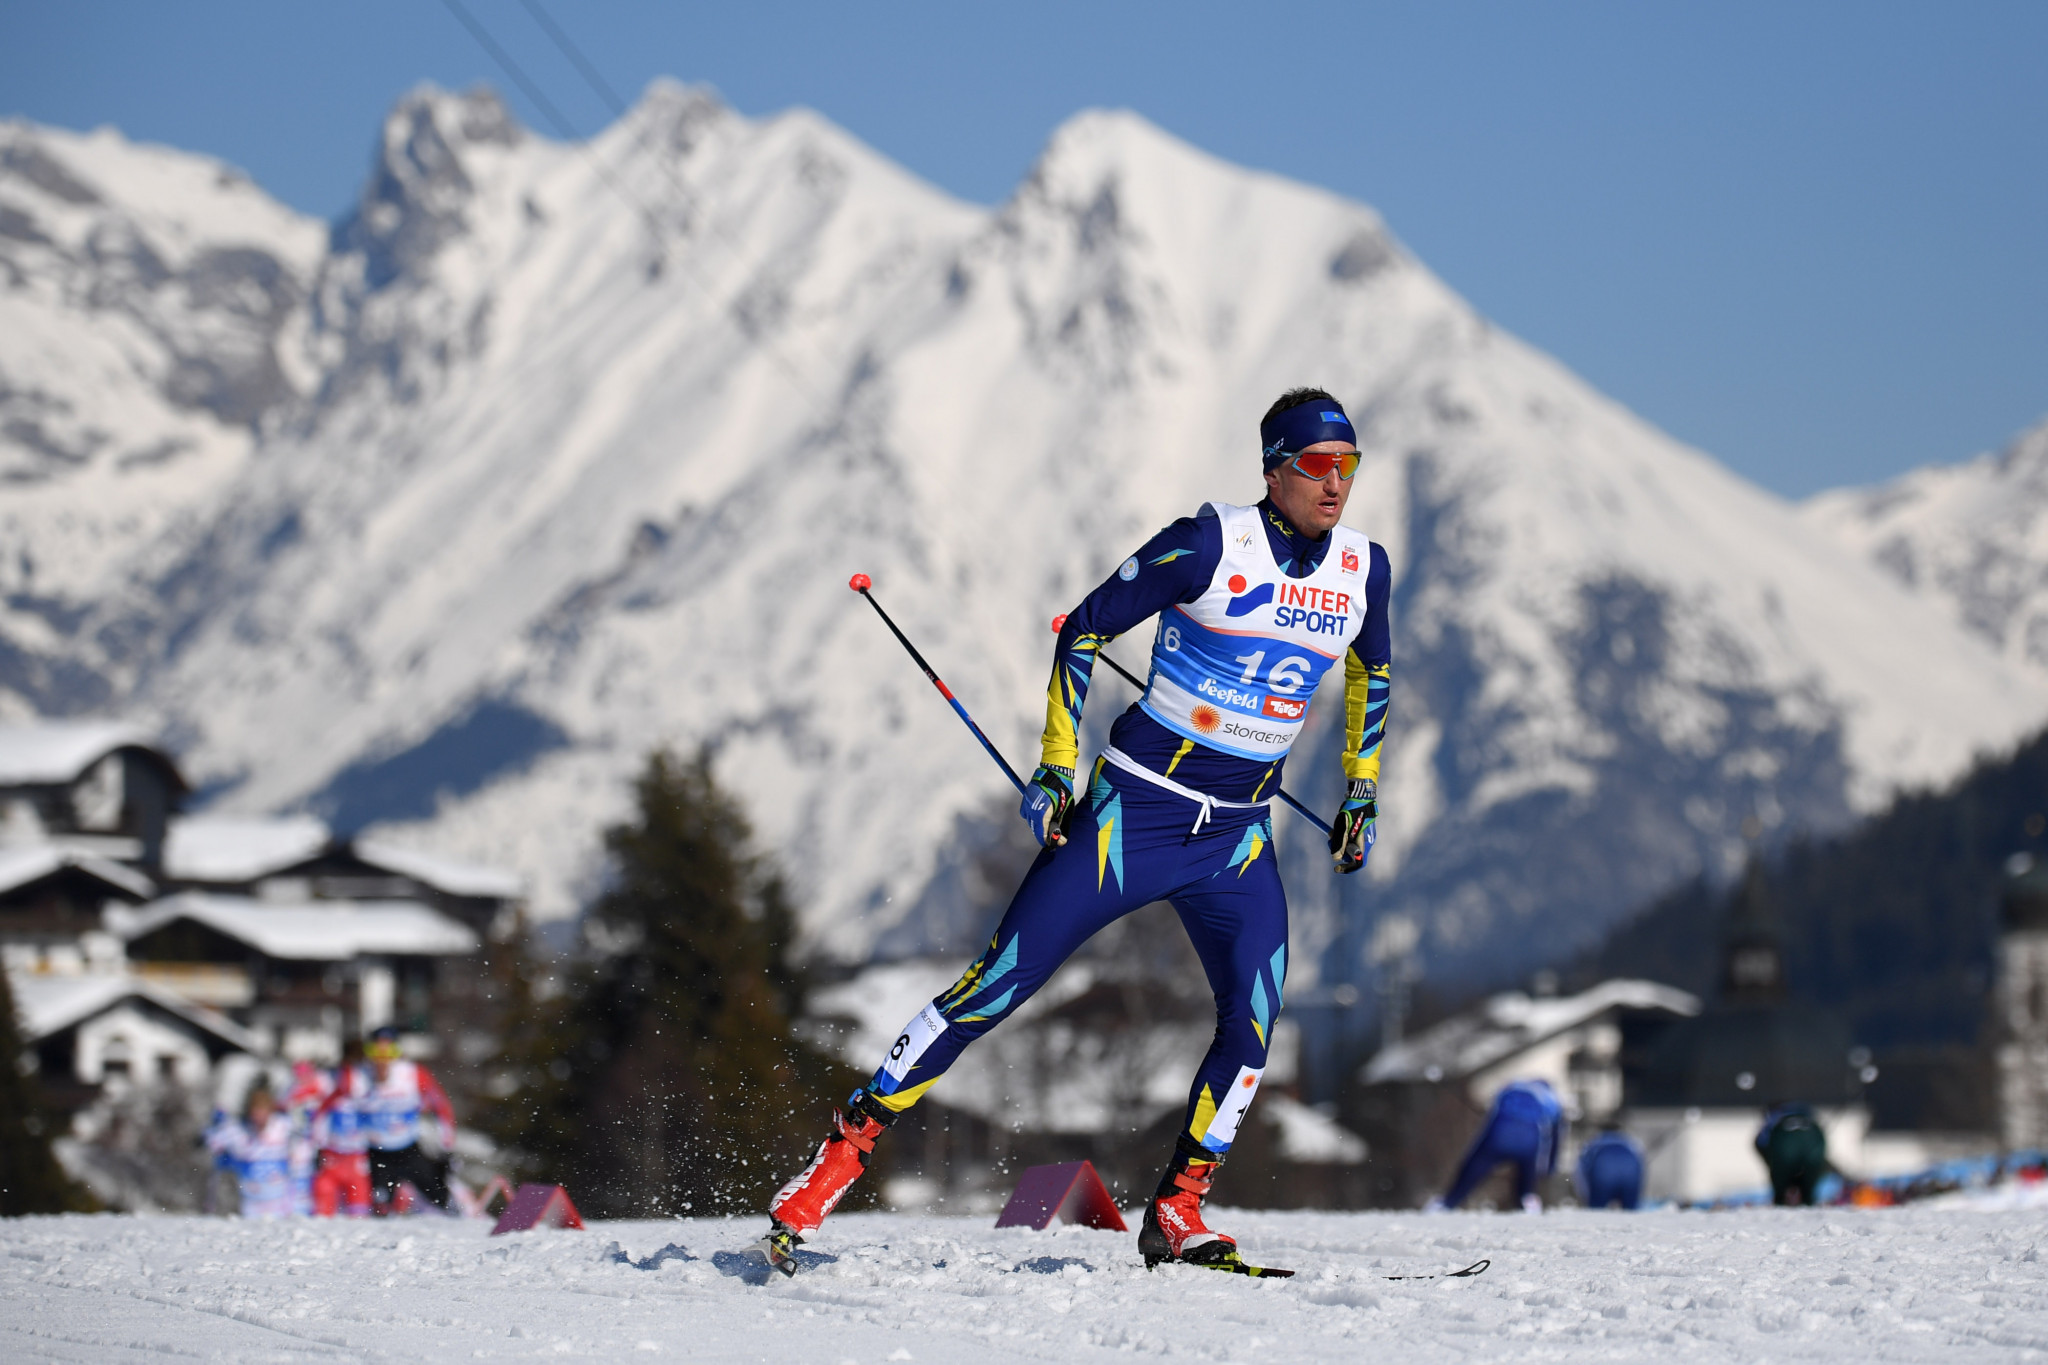 FIS ban three athletes and coach for role in blood doping scandal